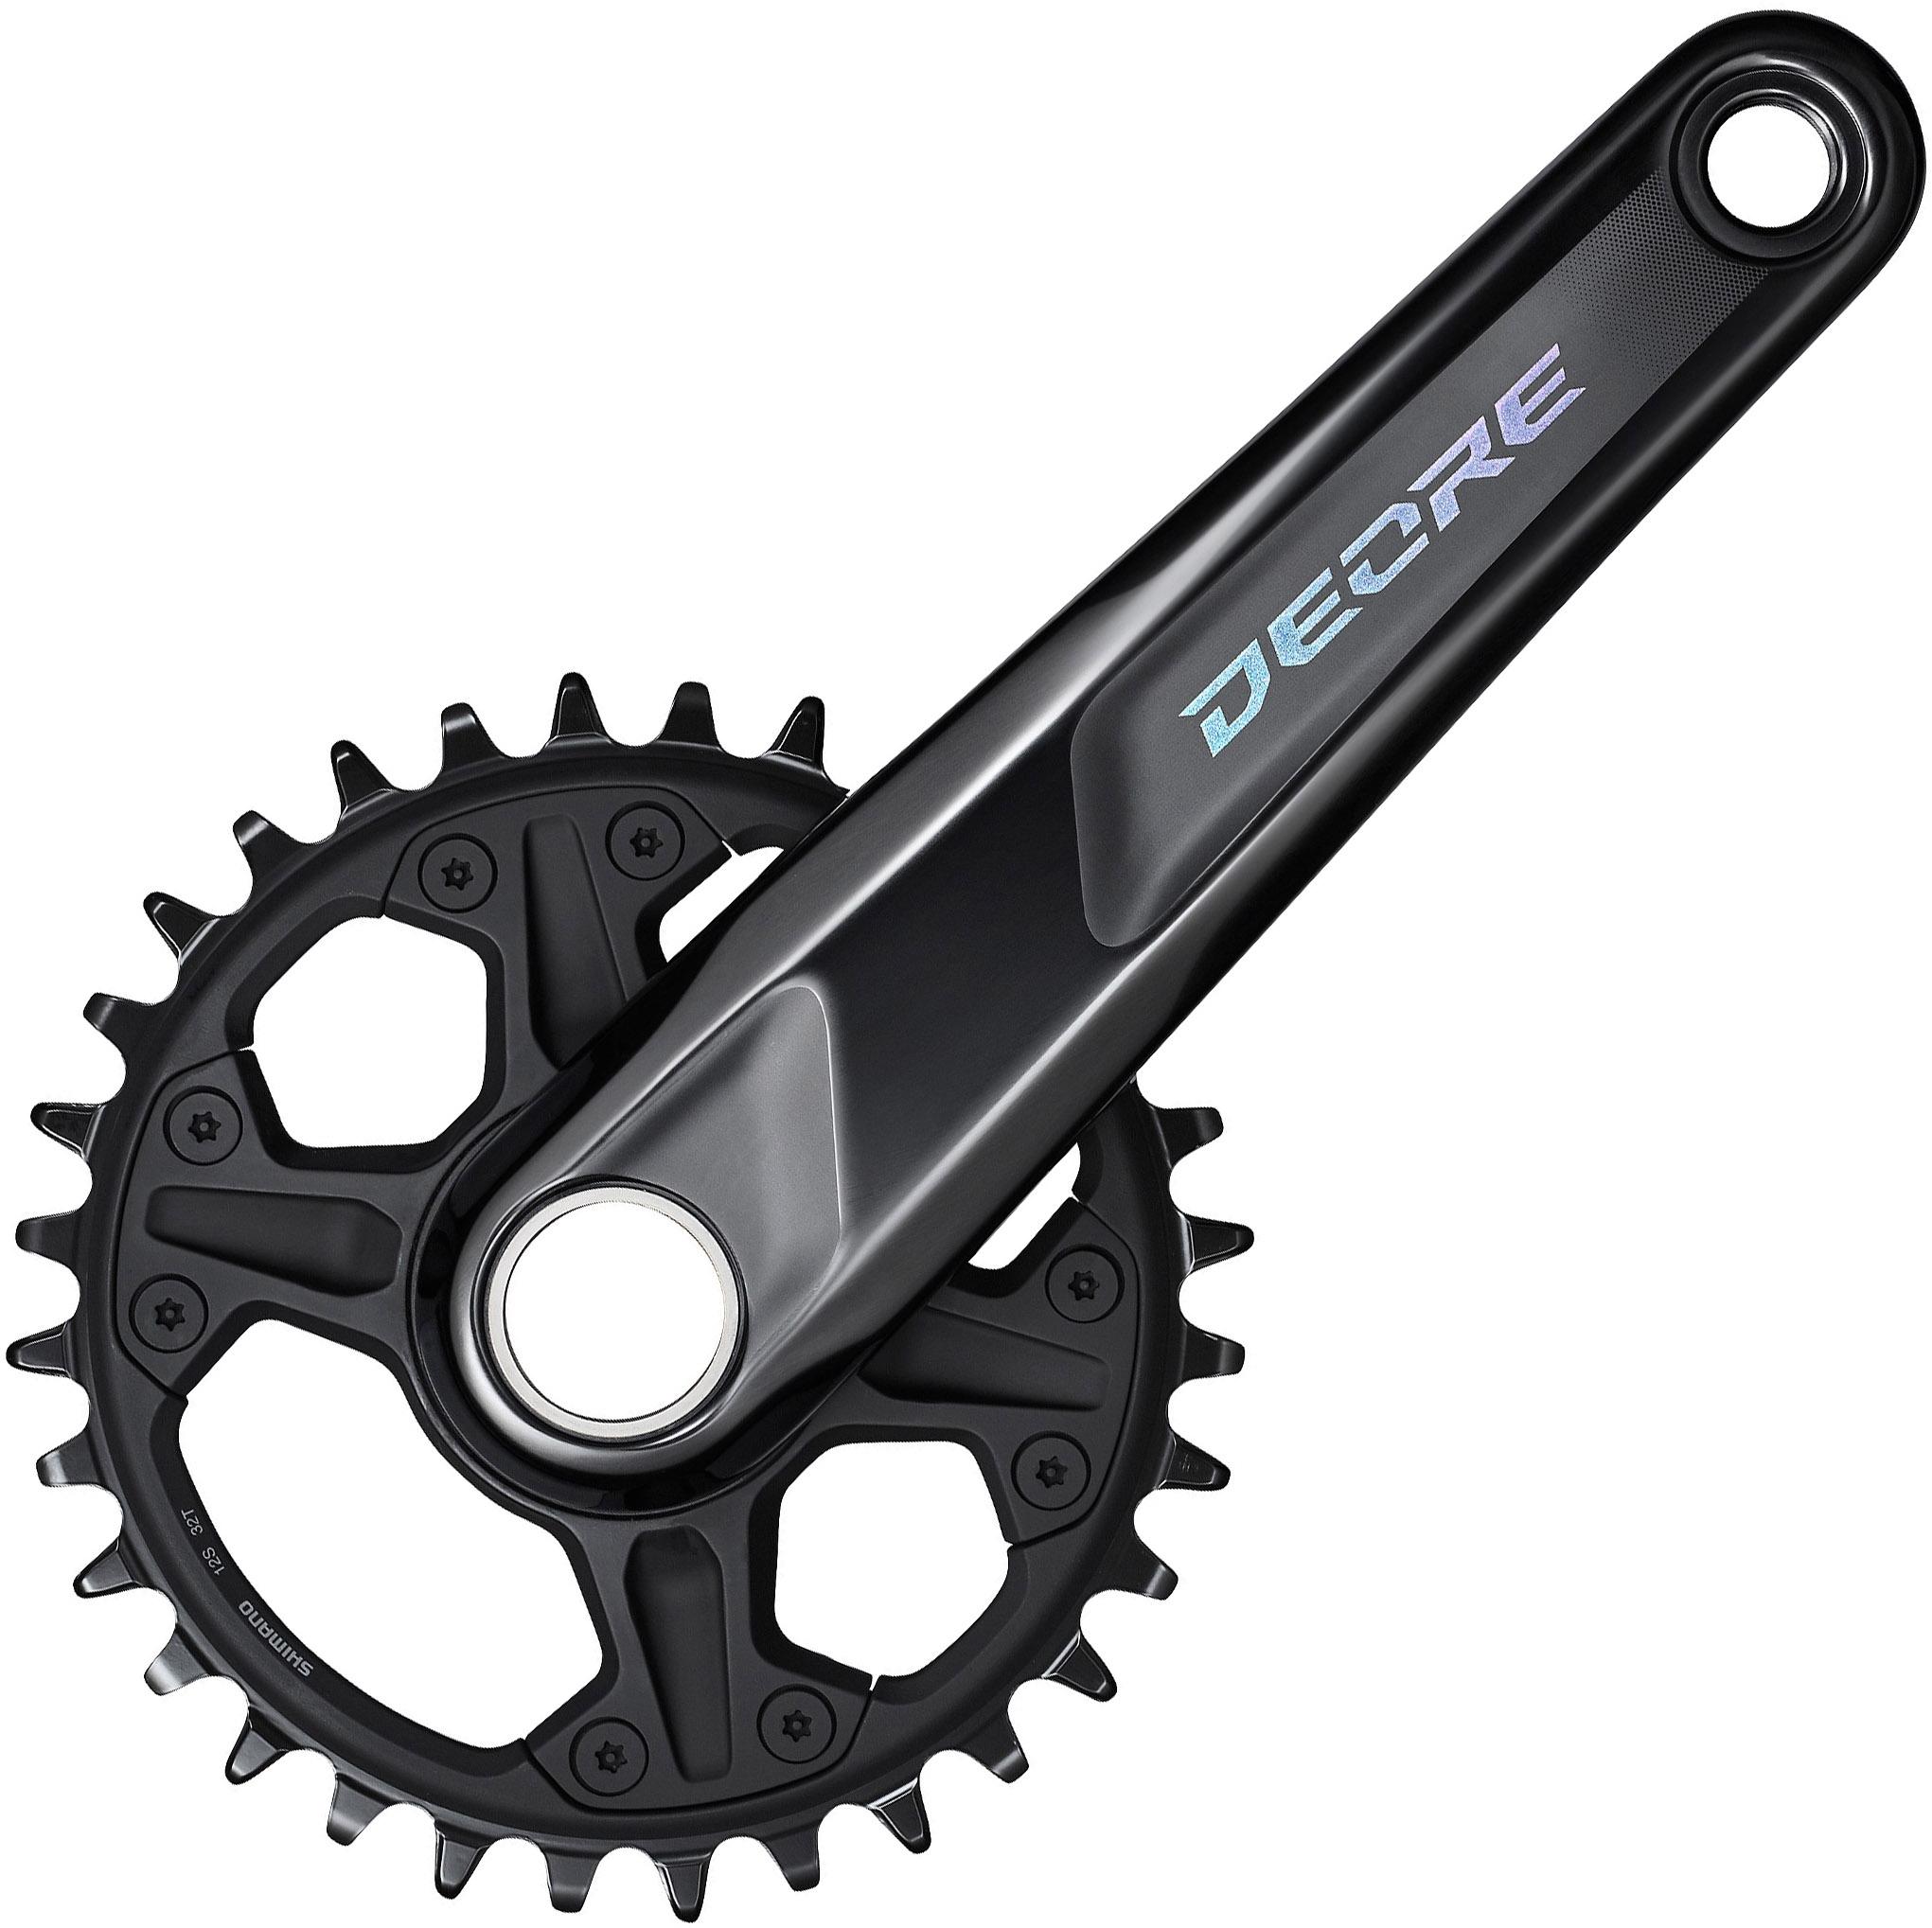 Shimano Deore M6100 Oe Crankset Without Bb - Grey